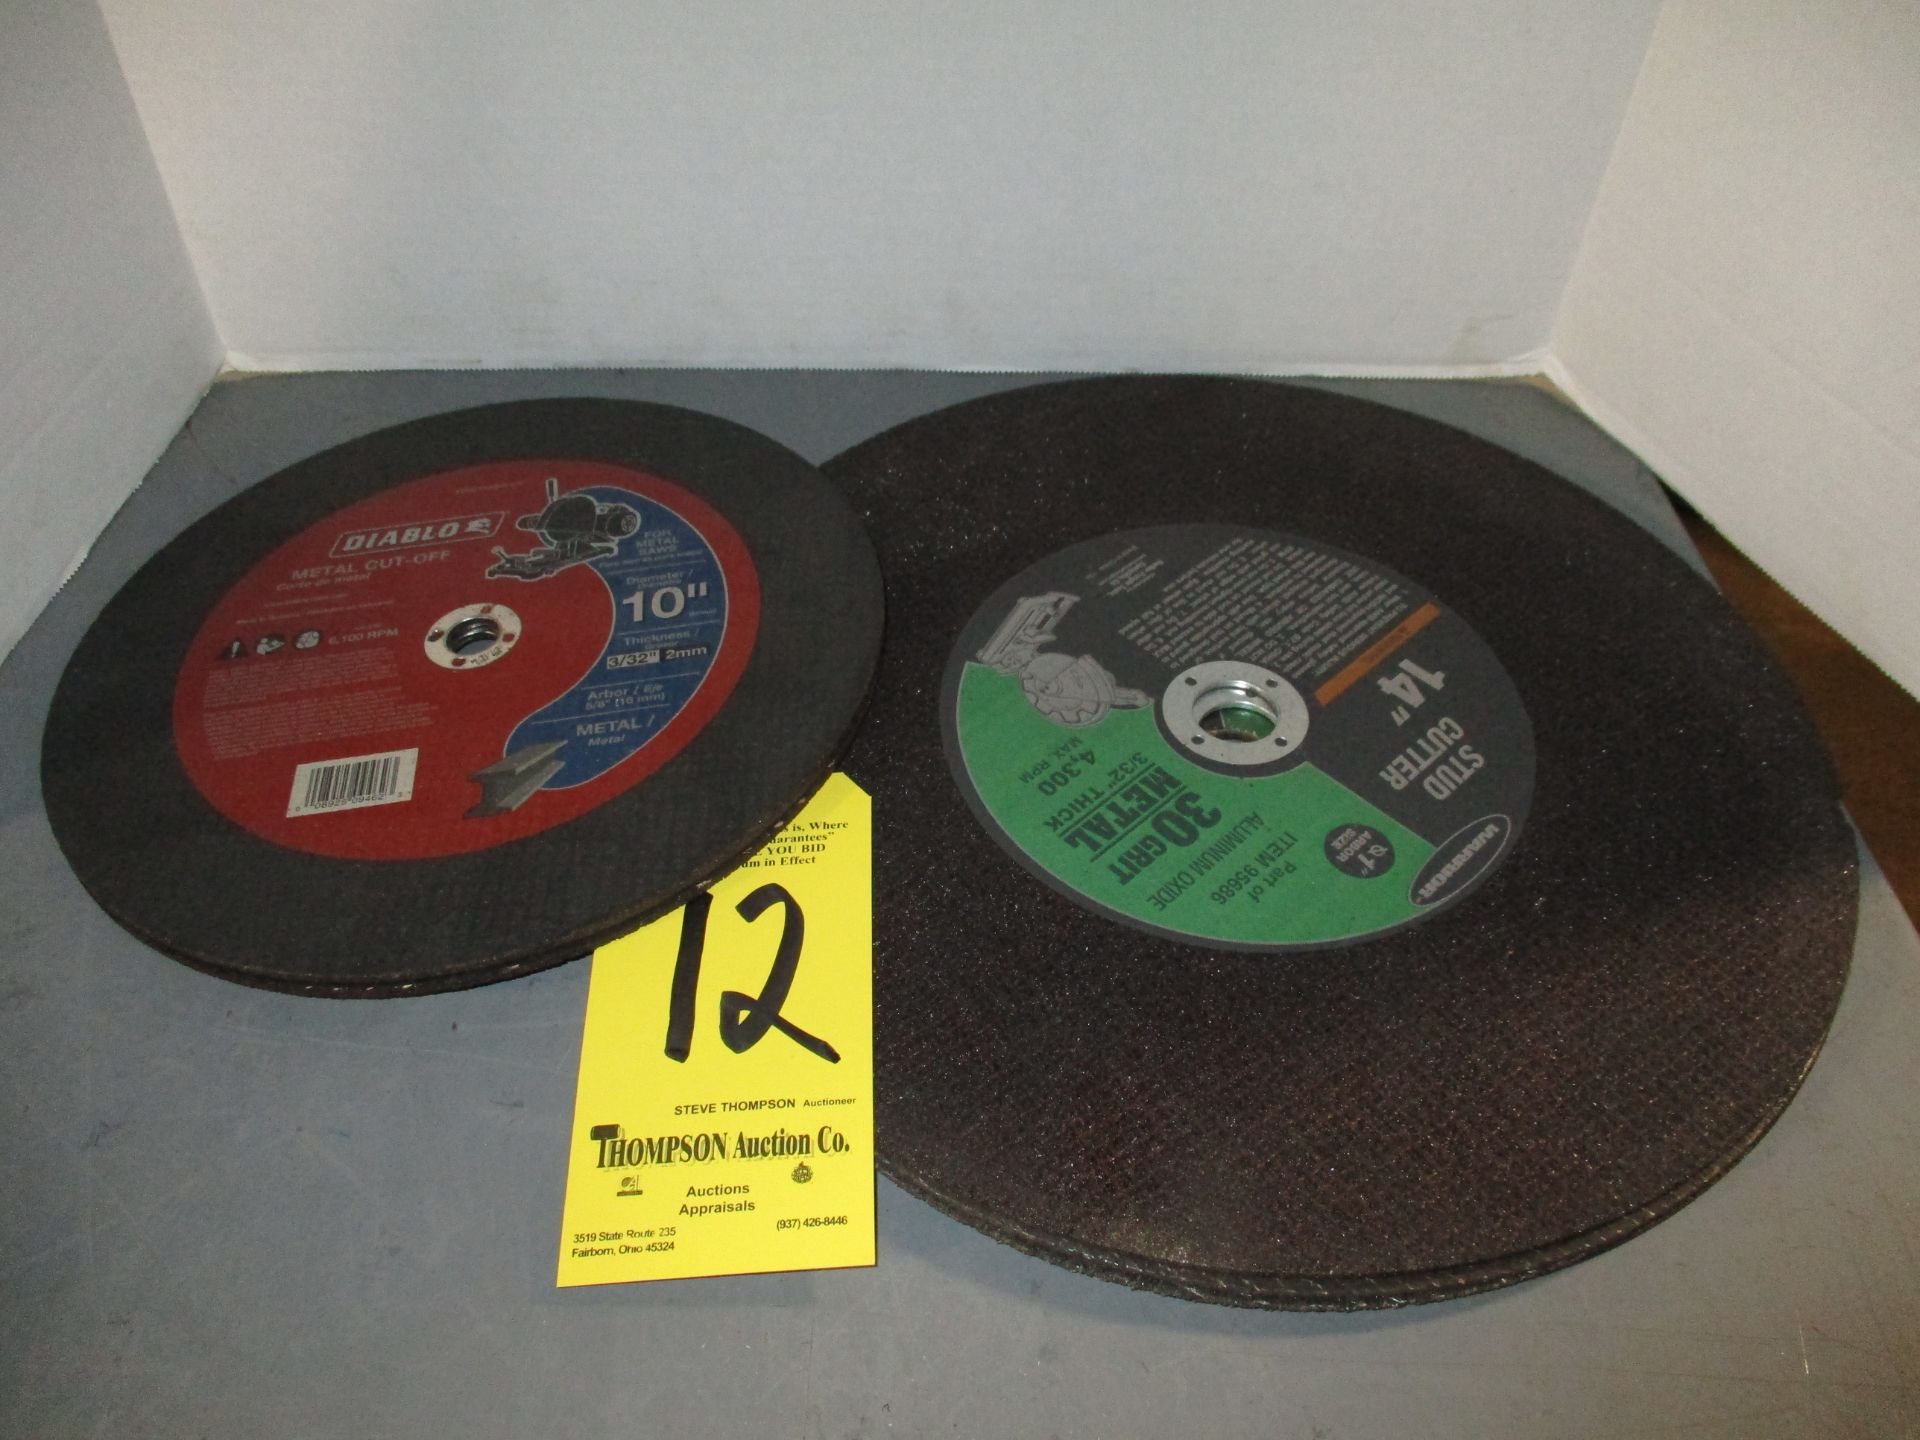 Abrasive Cut Off Wheels, (3) 10" and (3) 14"